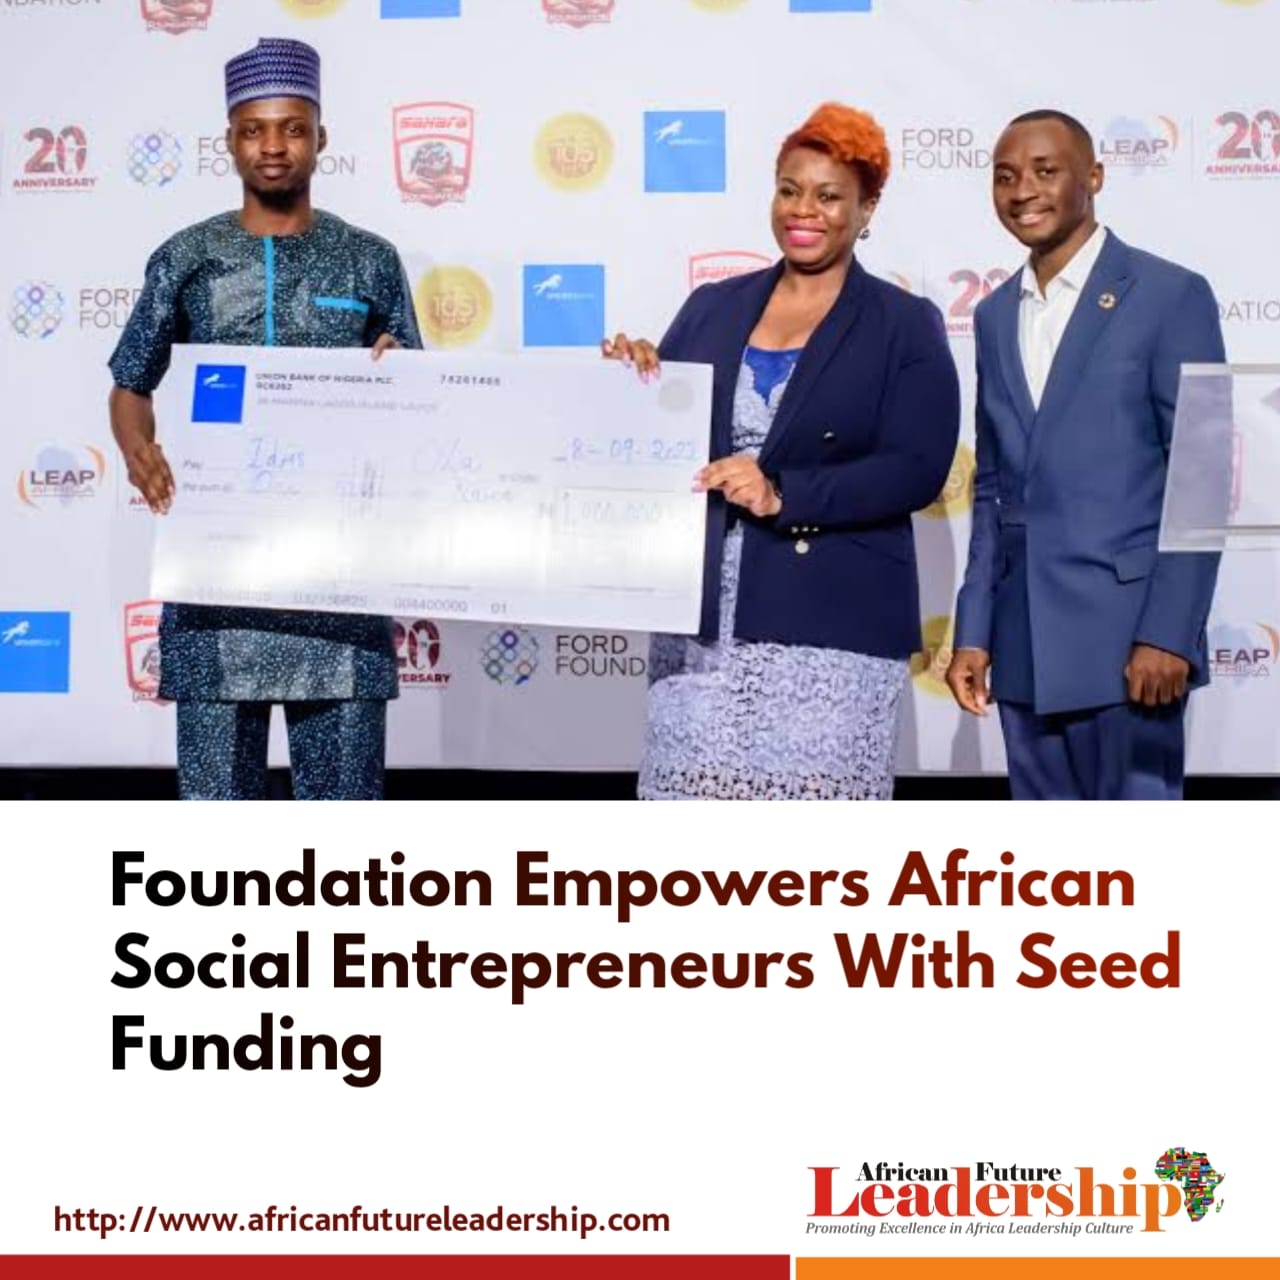 Foundation Empowers African Social Entrepreneurs With Seed Funding